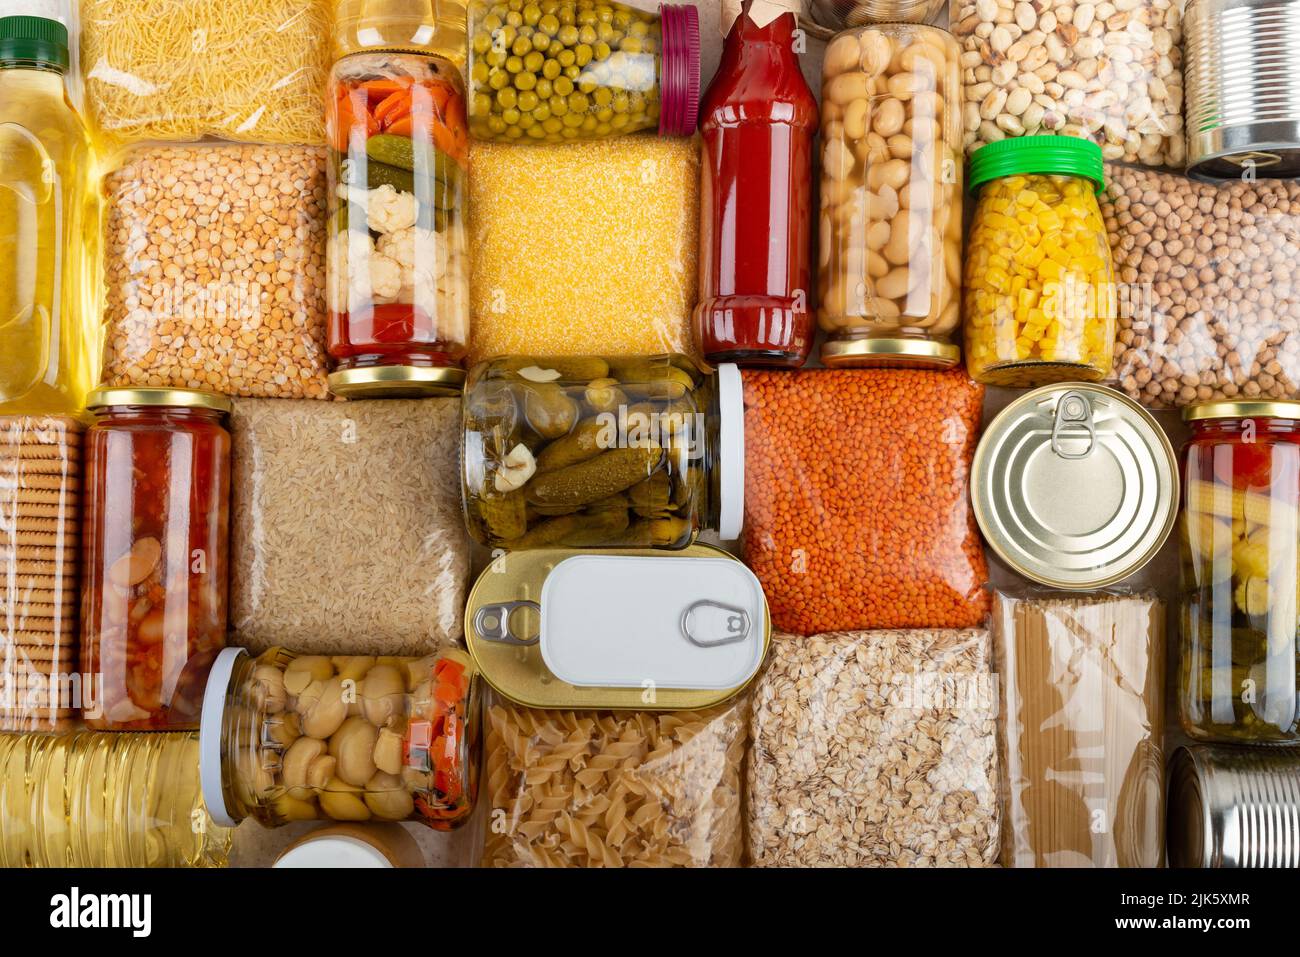 Emergency survival groceries on kitchen table closeup flat lay Stock Photo